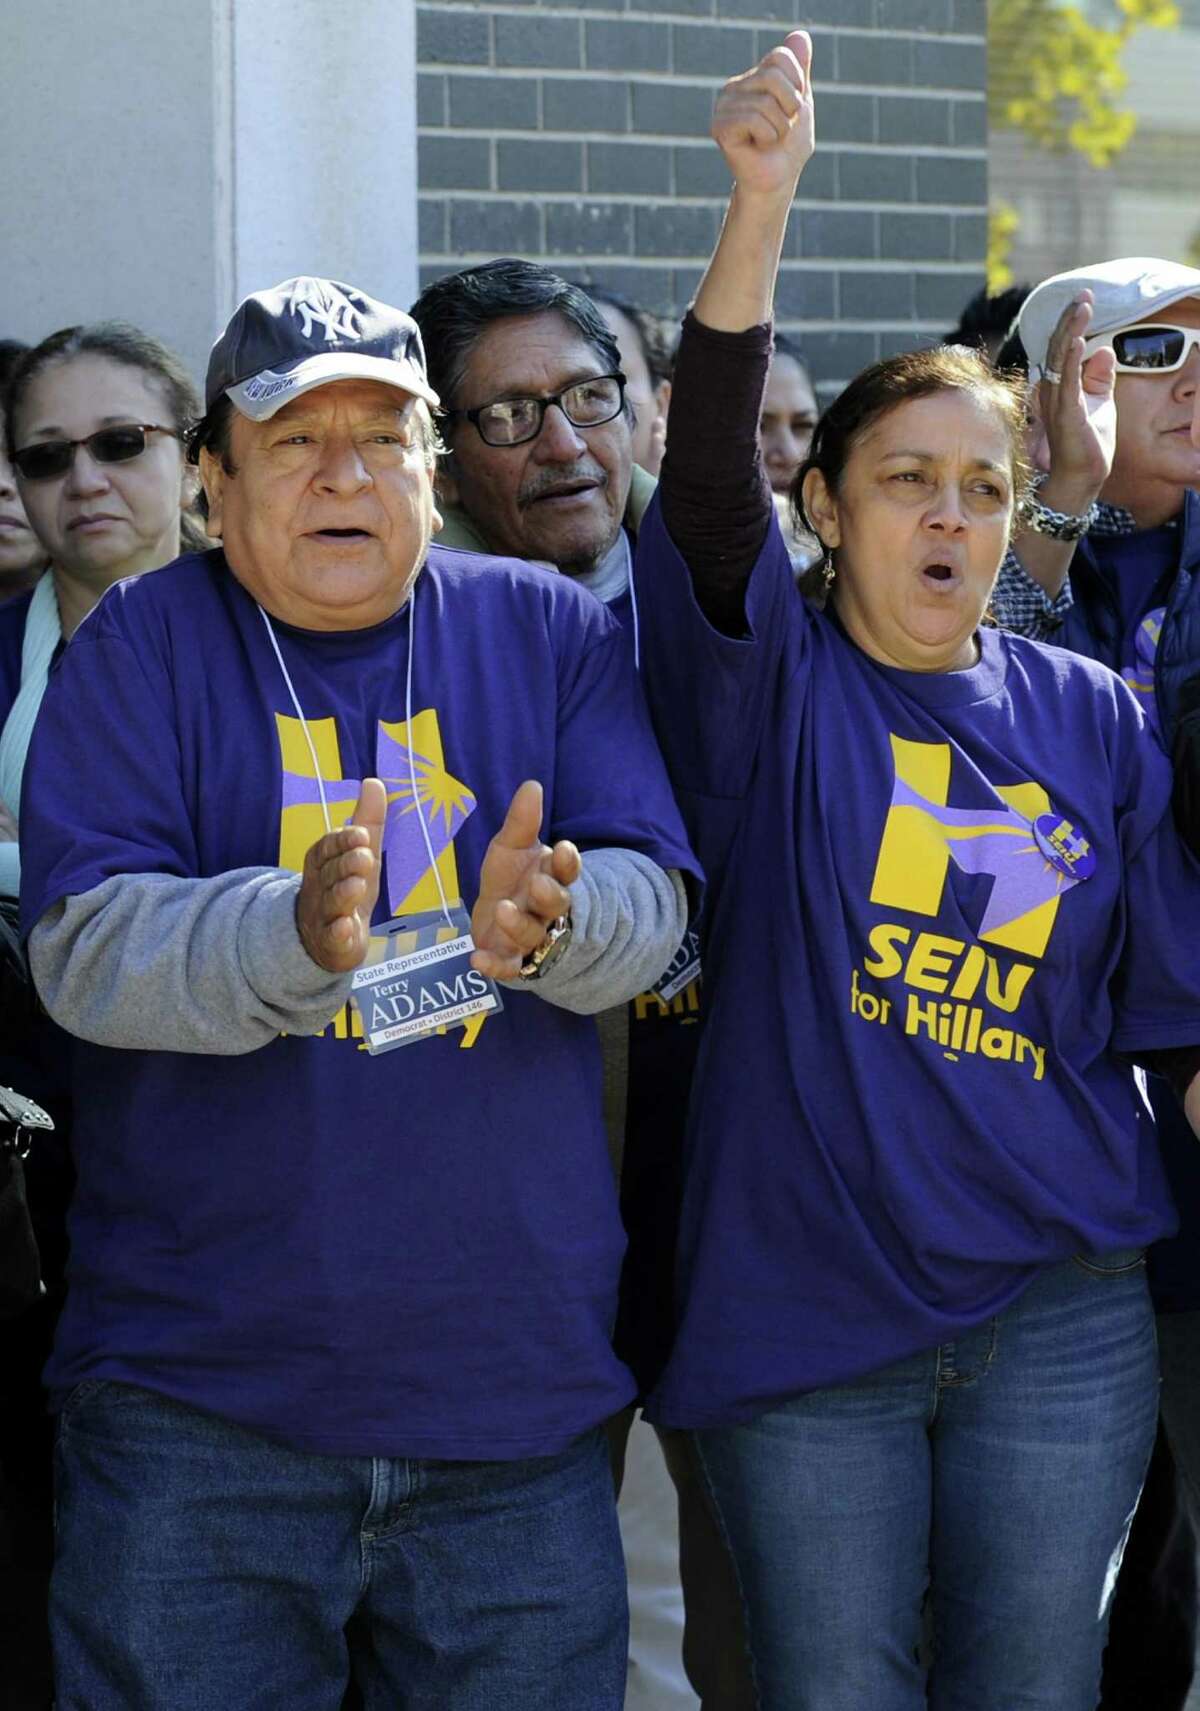 Above, State Rep. Terry Adams rallies support with the unionized workers of Local 32BJ SEIU, as they gather outside their union office in Stamford, Conn on Sat., Nov. 5, 2016. From left, Rene Polo and Aura Duarte,along with other unionized workers of Local 32BJ SEIU, rally support for Presidential candidate Hillary Clinton outside their union offices in Stamford, Conn on Sat., Nov. 5, 2016.